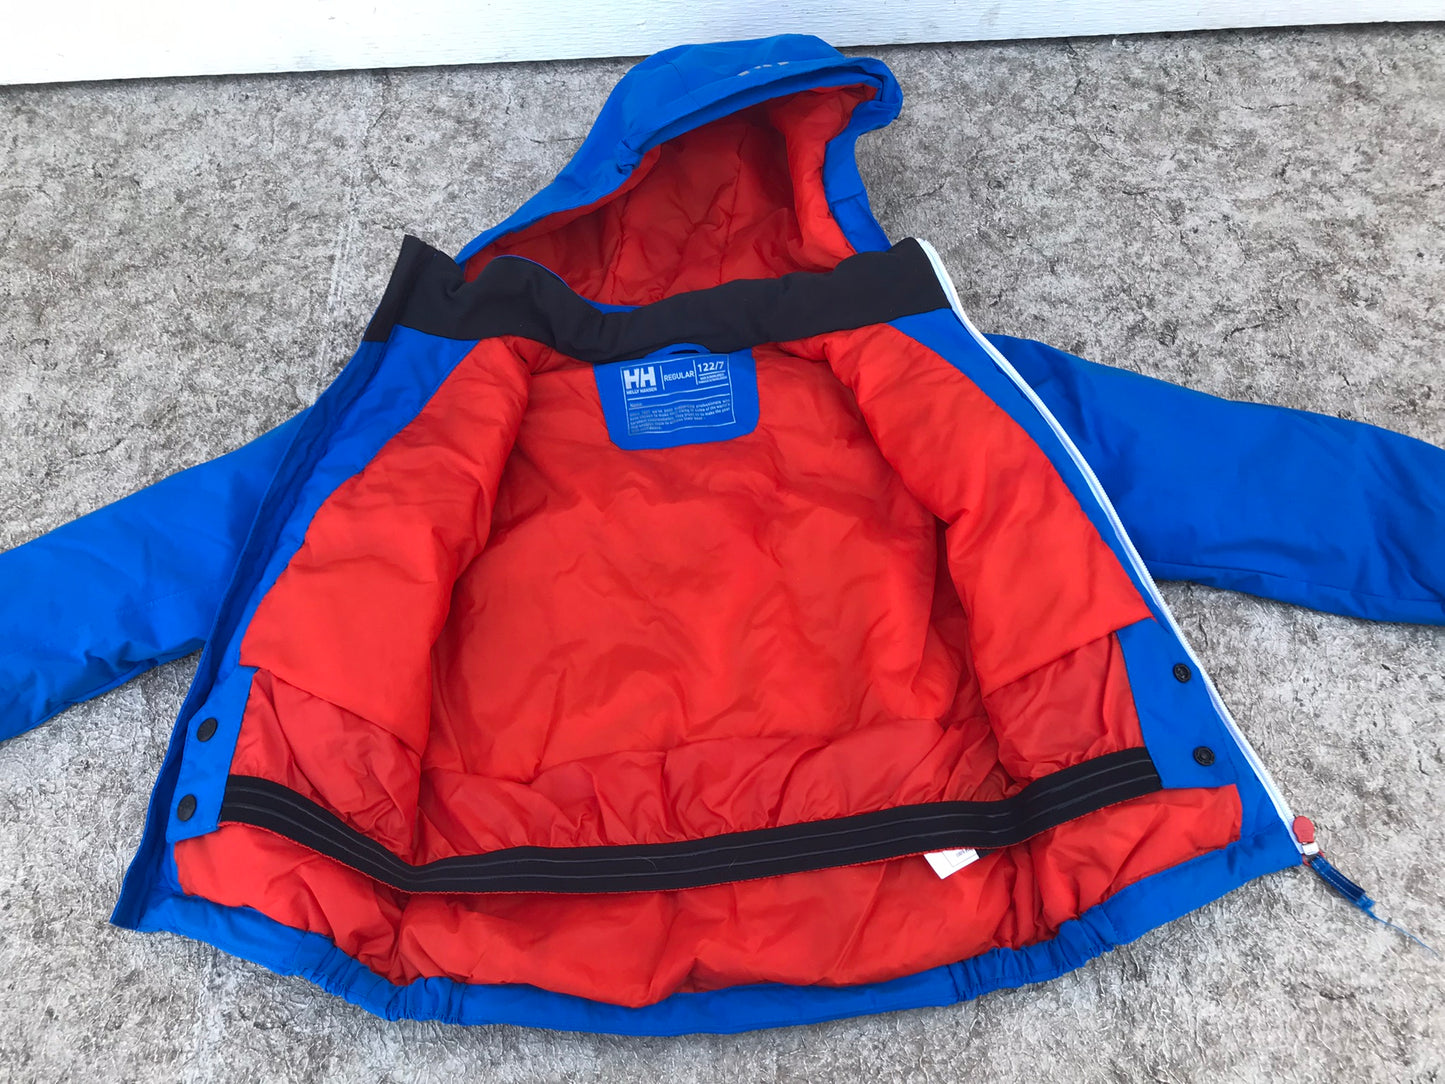 Winter Coat Child Size 7 Helly Hansen With Ski Snow Belt Water and Wind Proof Blue and Orange  New